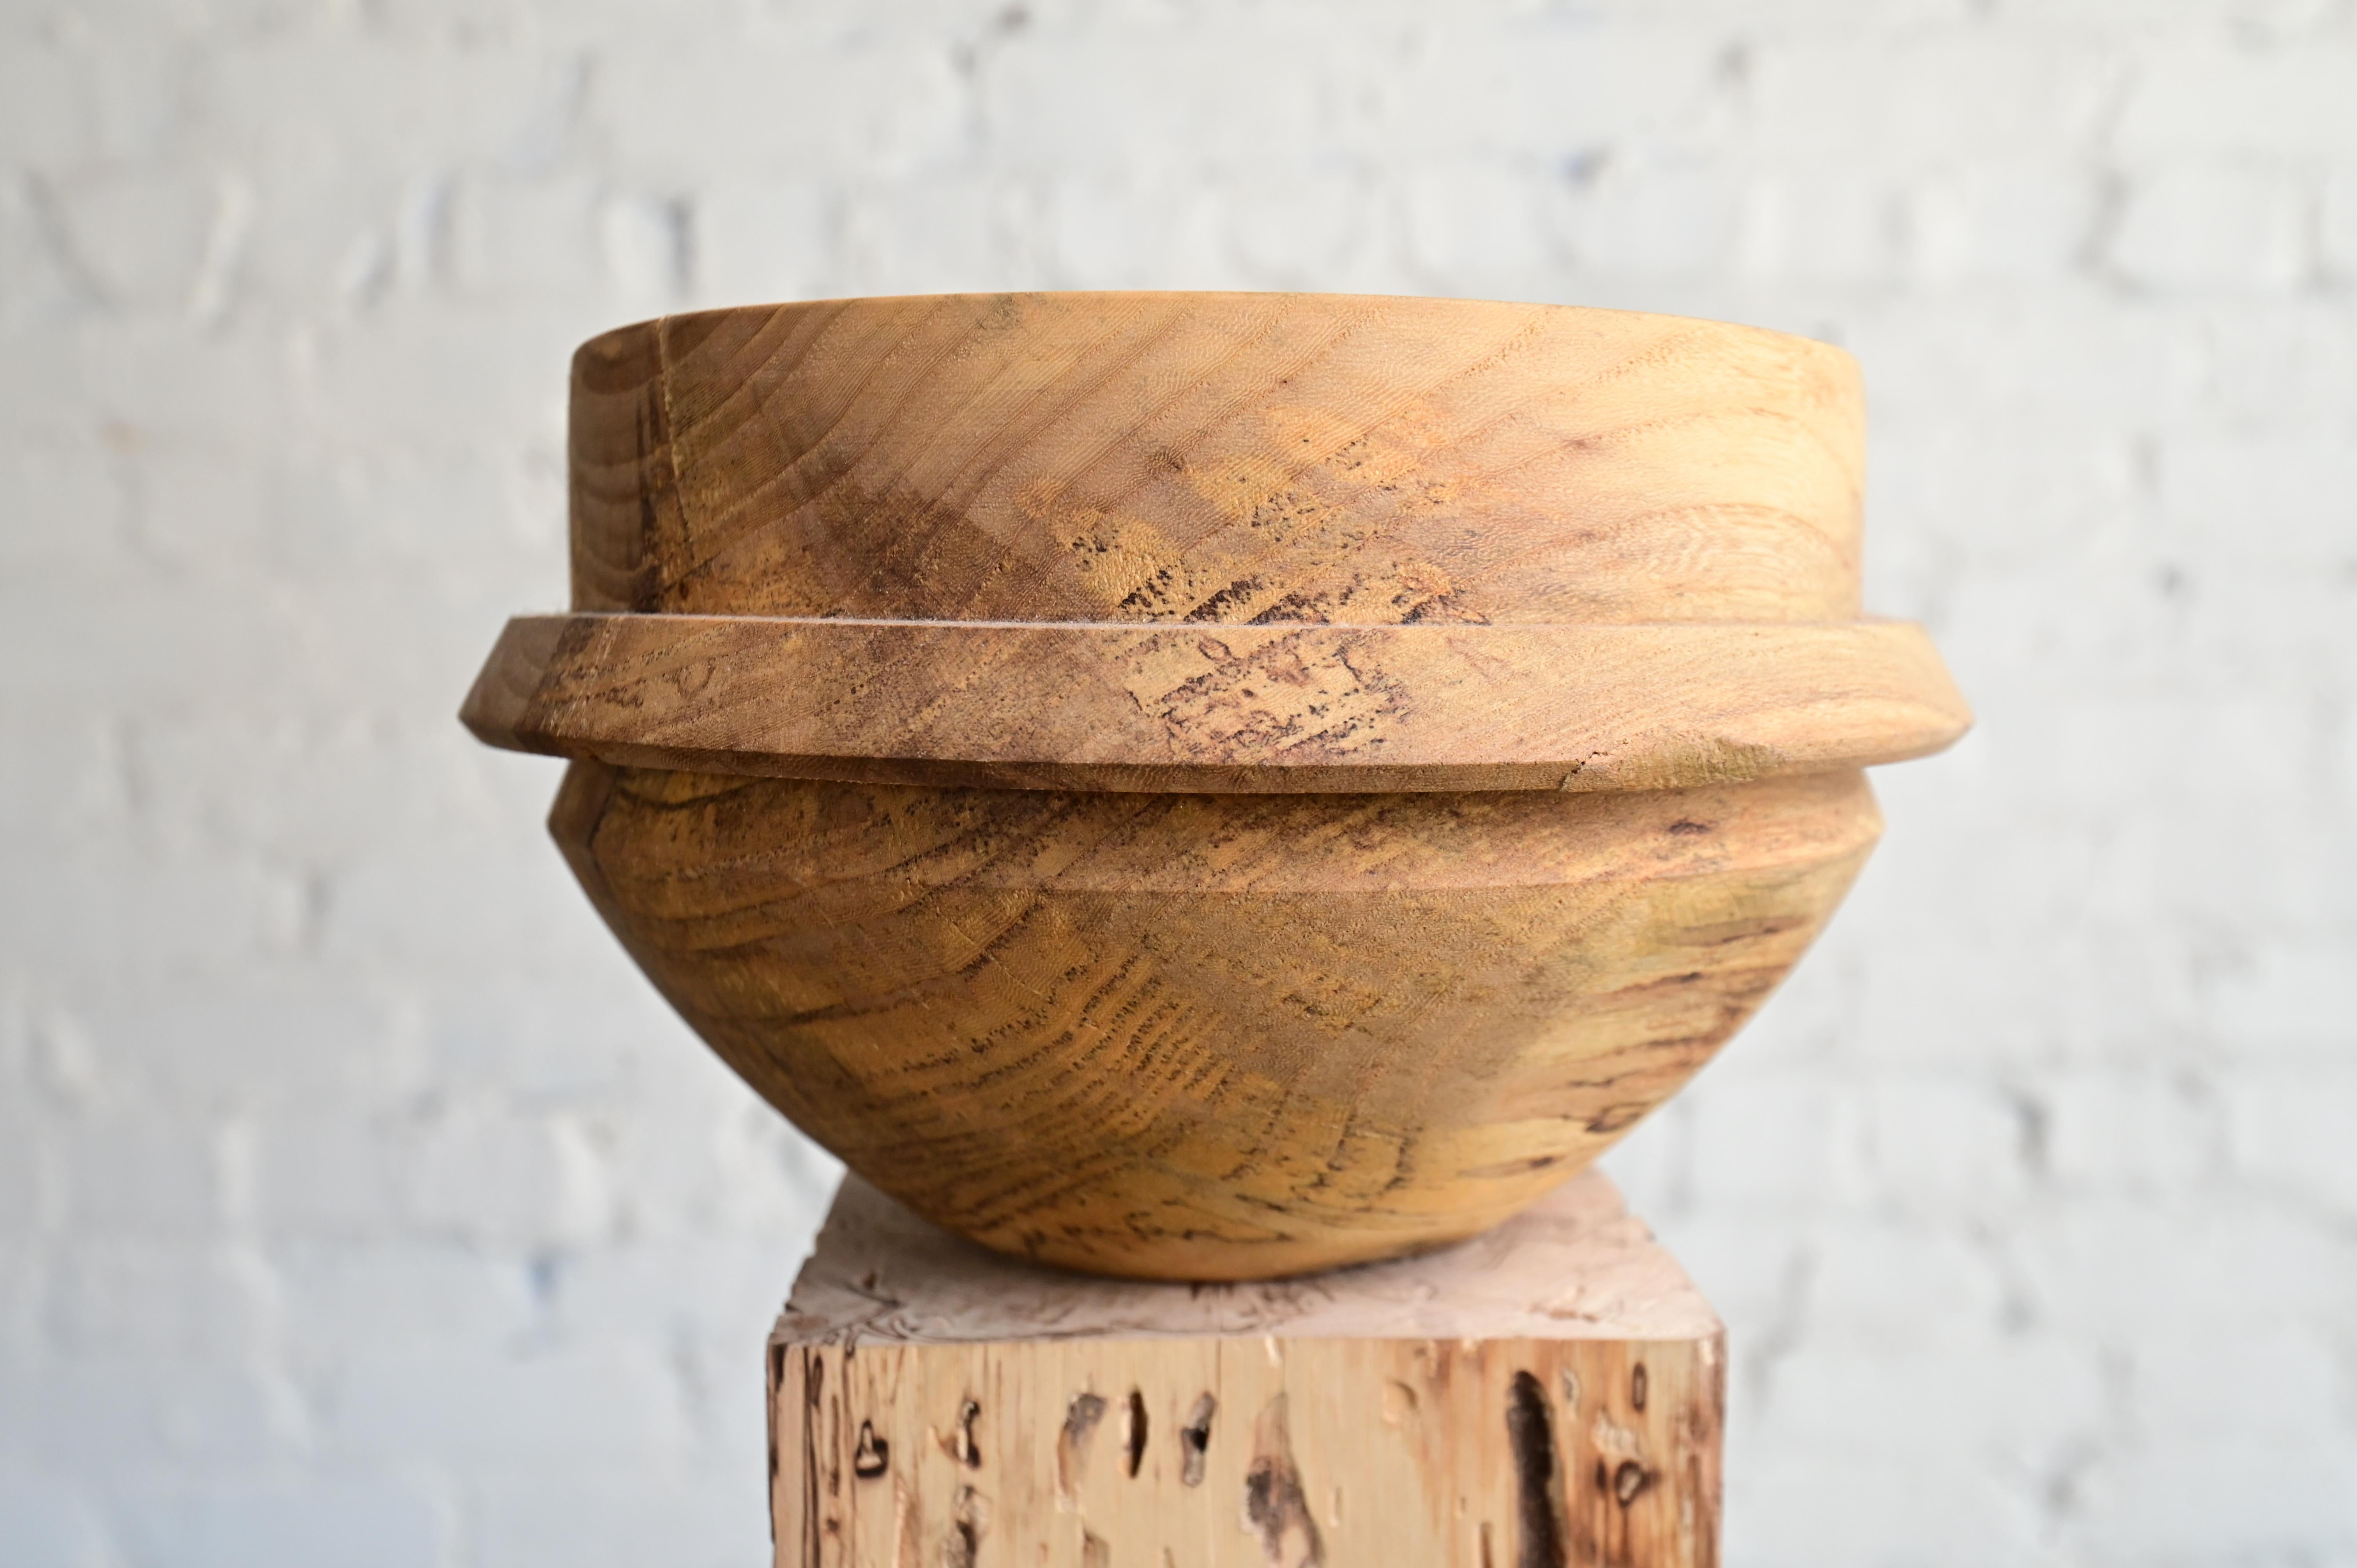 Original turned spalted hackberry wood bowl, made with handle. Bowl is brand new and in excellent condition. Was finished with food grade finish so it can handle food. Spalting and natural grain variation. 5.5